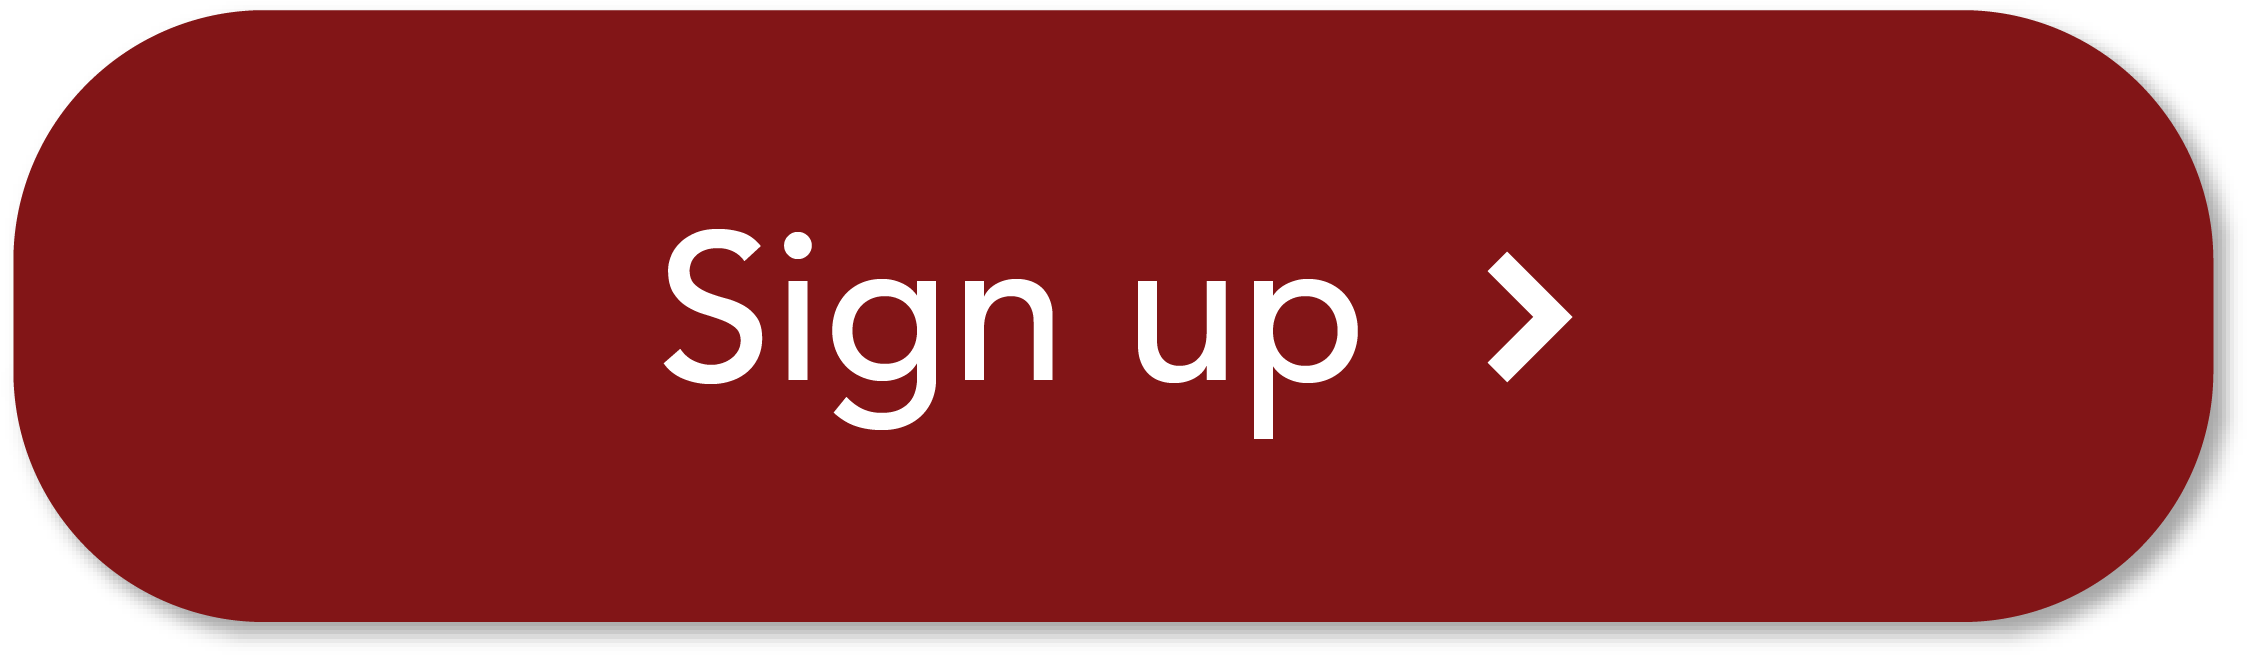 Click Here To Sign Up - Log In Sign Up Button (2250x663)